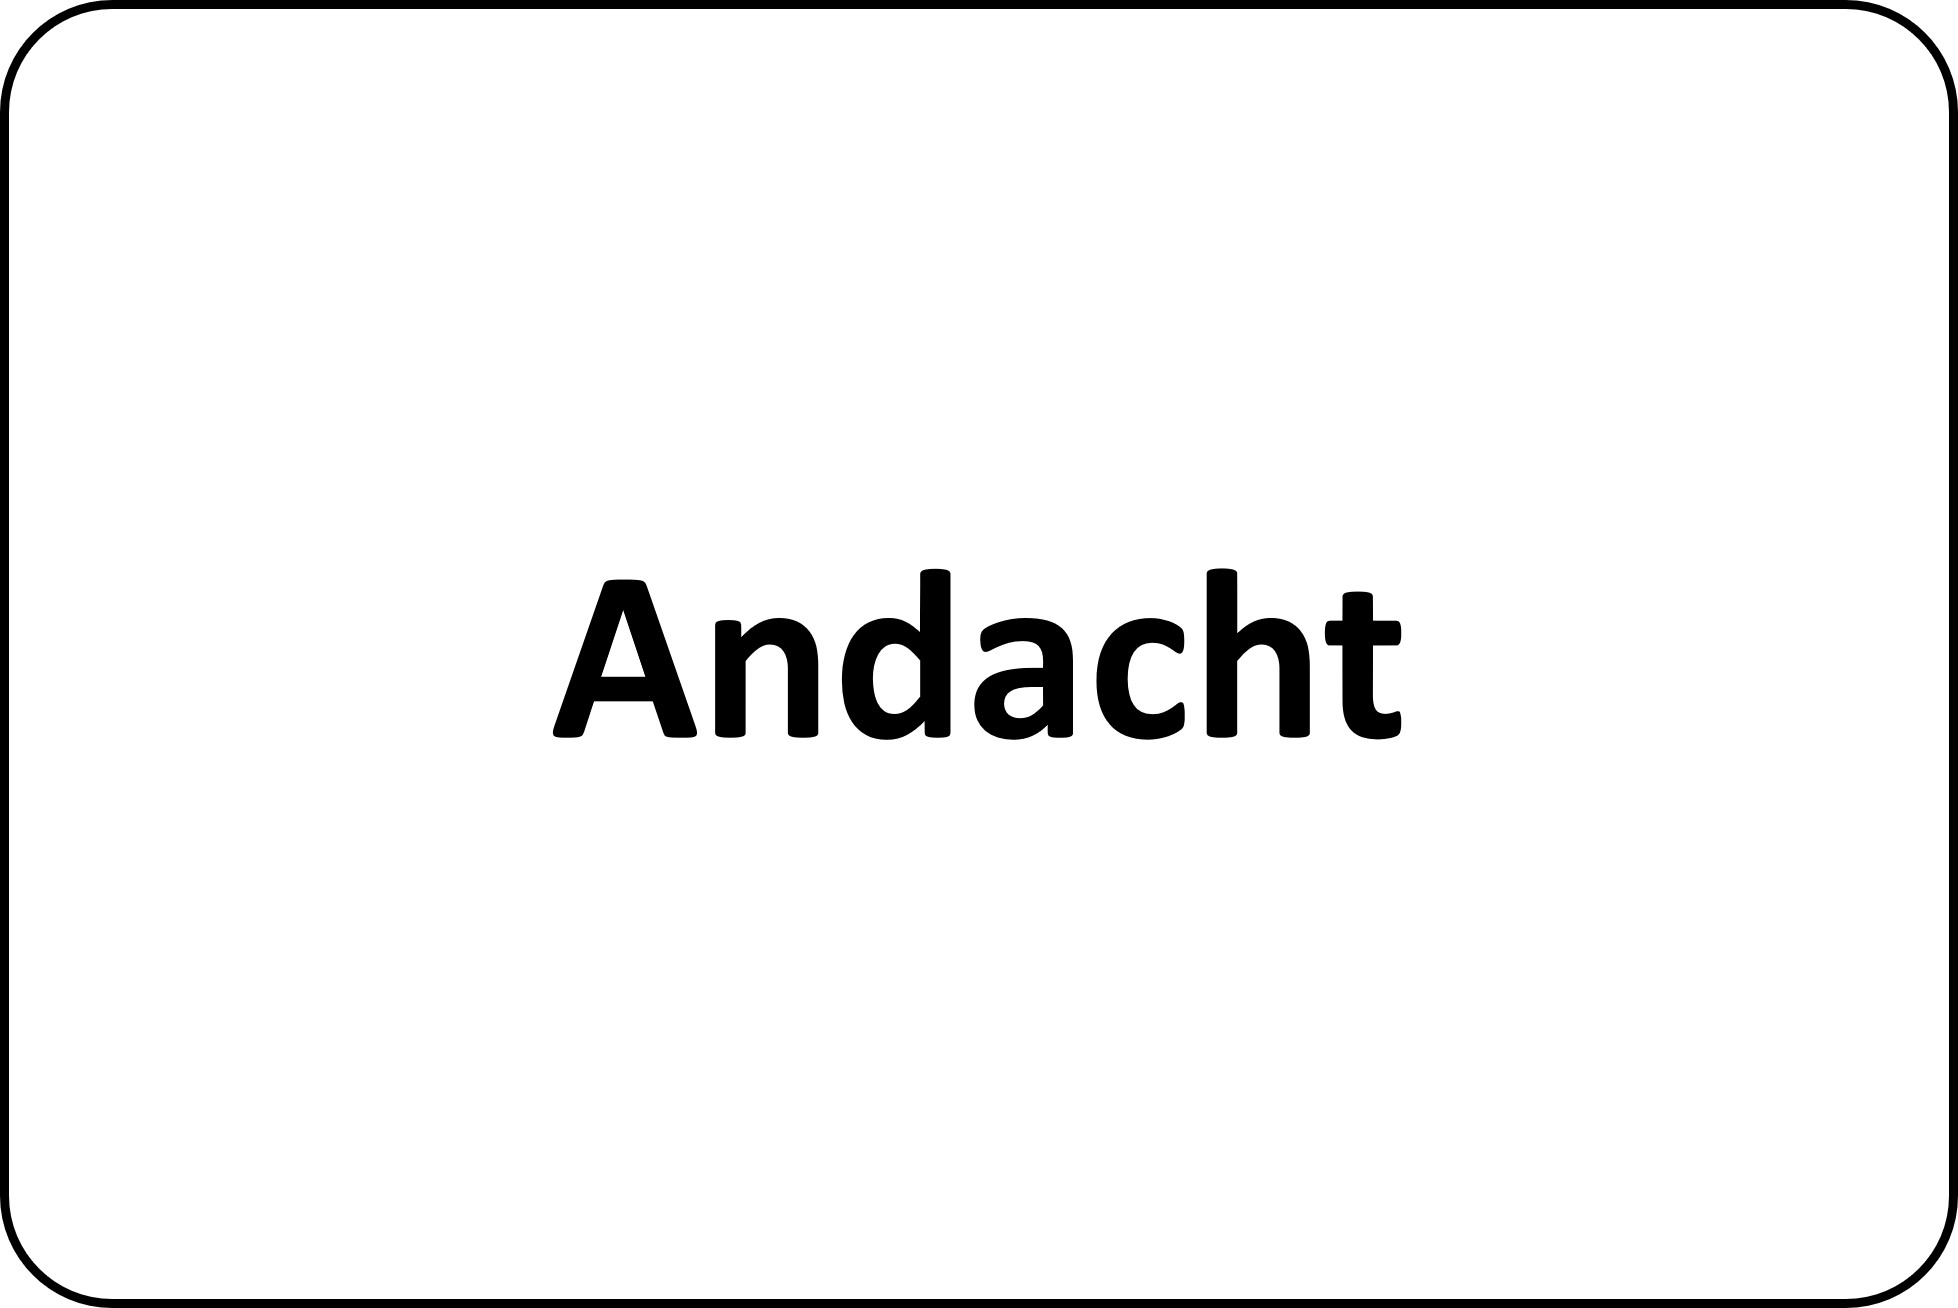 Andacht